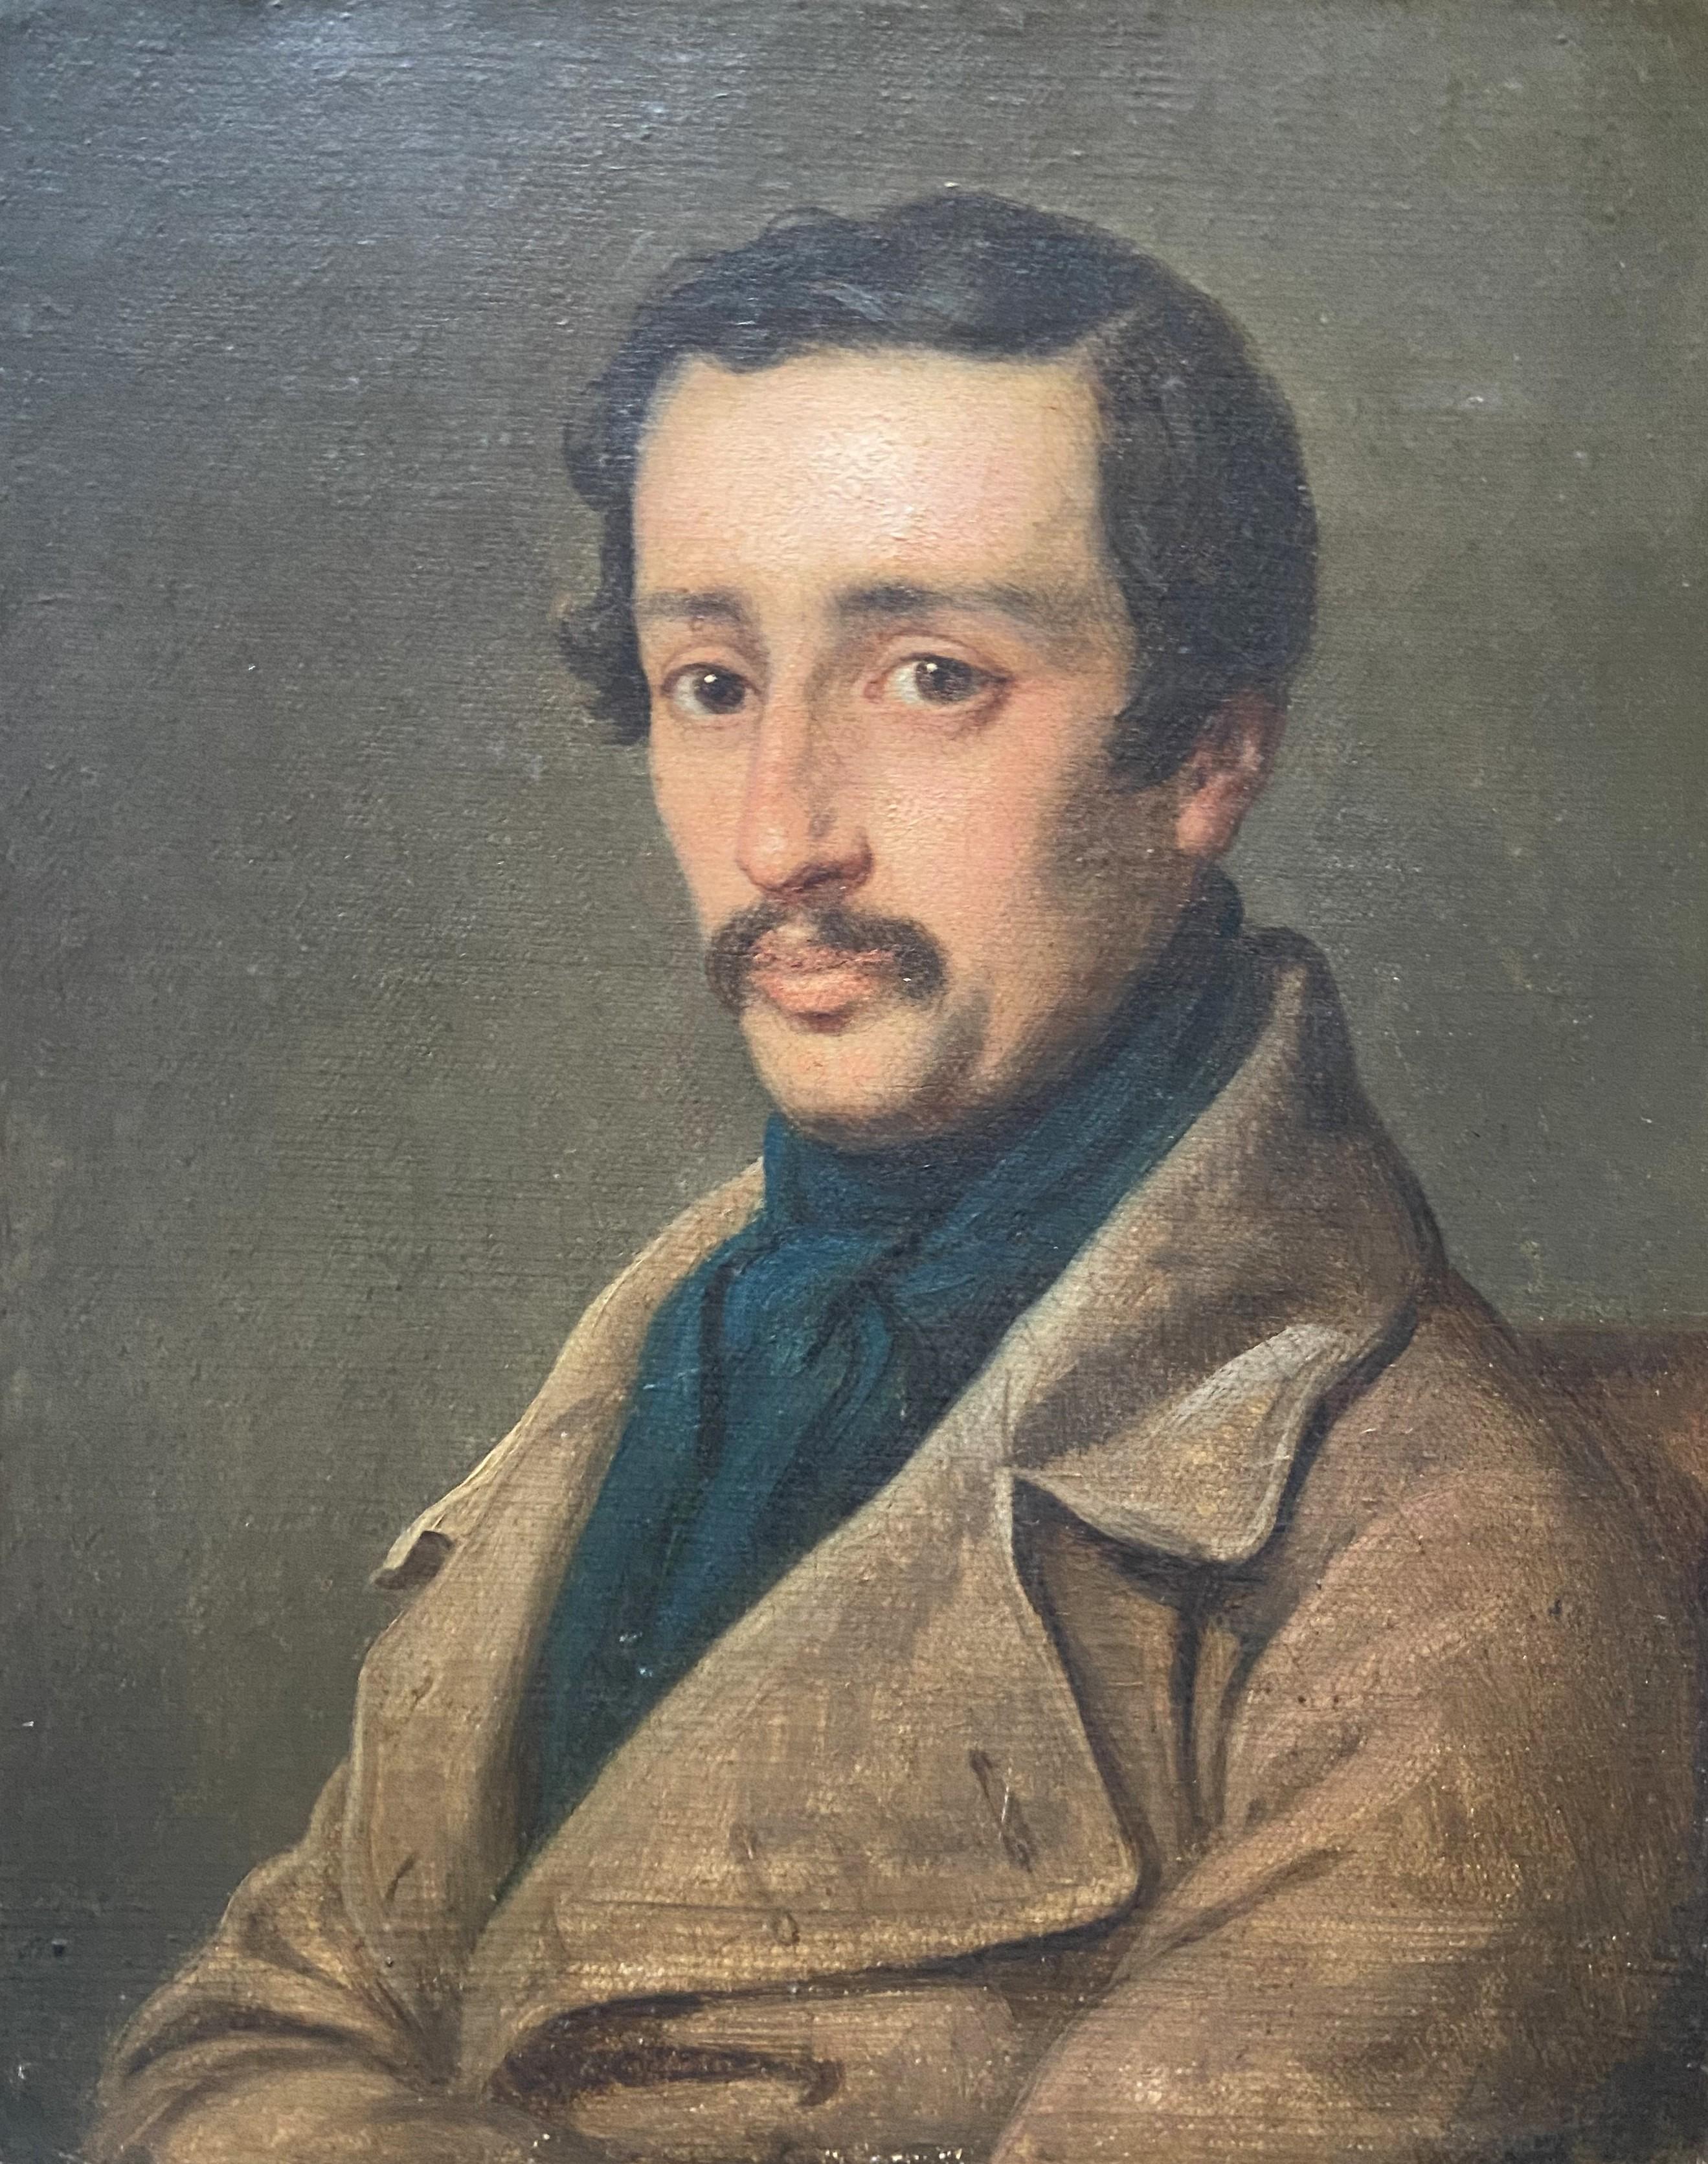 Attributed to Charles de Steuben (1788-1856) 
Portrait of a man, 
oil on canvas
22 x 18 cm
In a modern frame : 35,5 x 31,5 cm

The attribution of this small portrait to Charles de Steuben is based on stylistic similarities, and more strangely on the